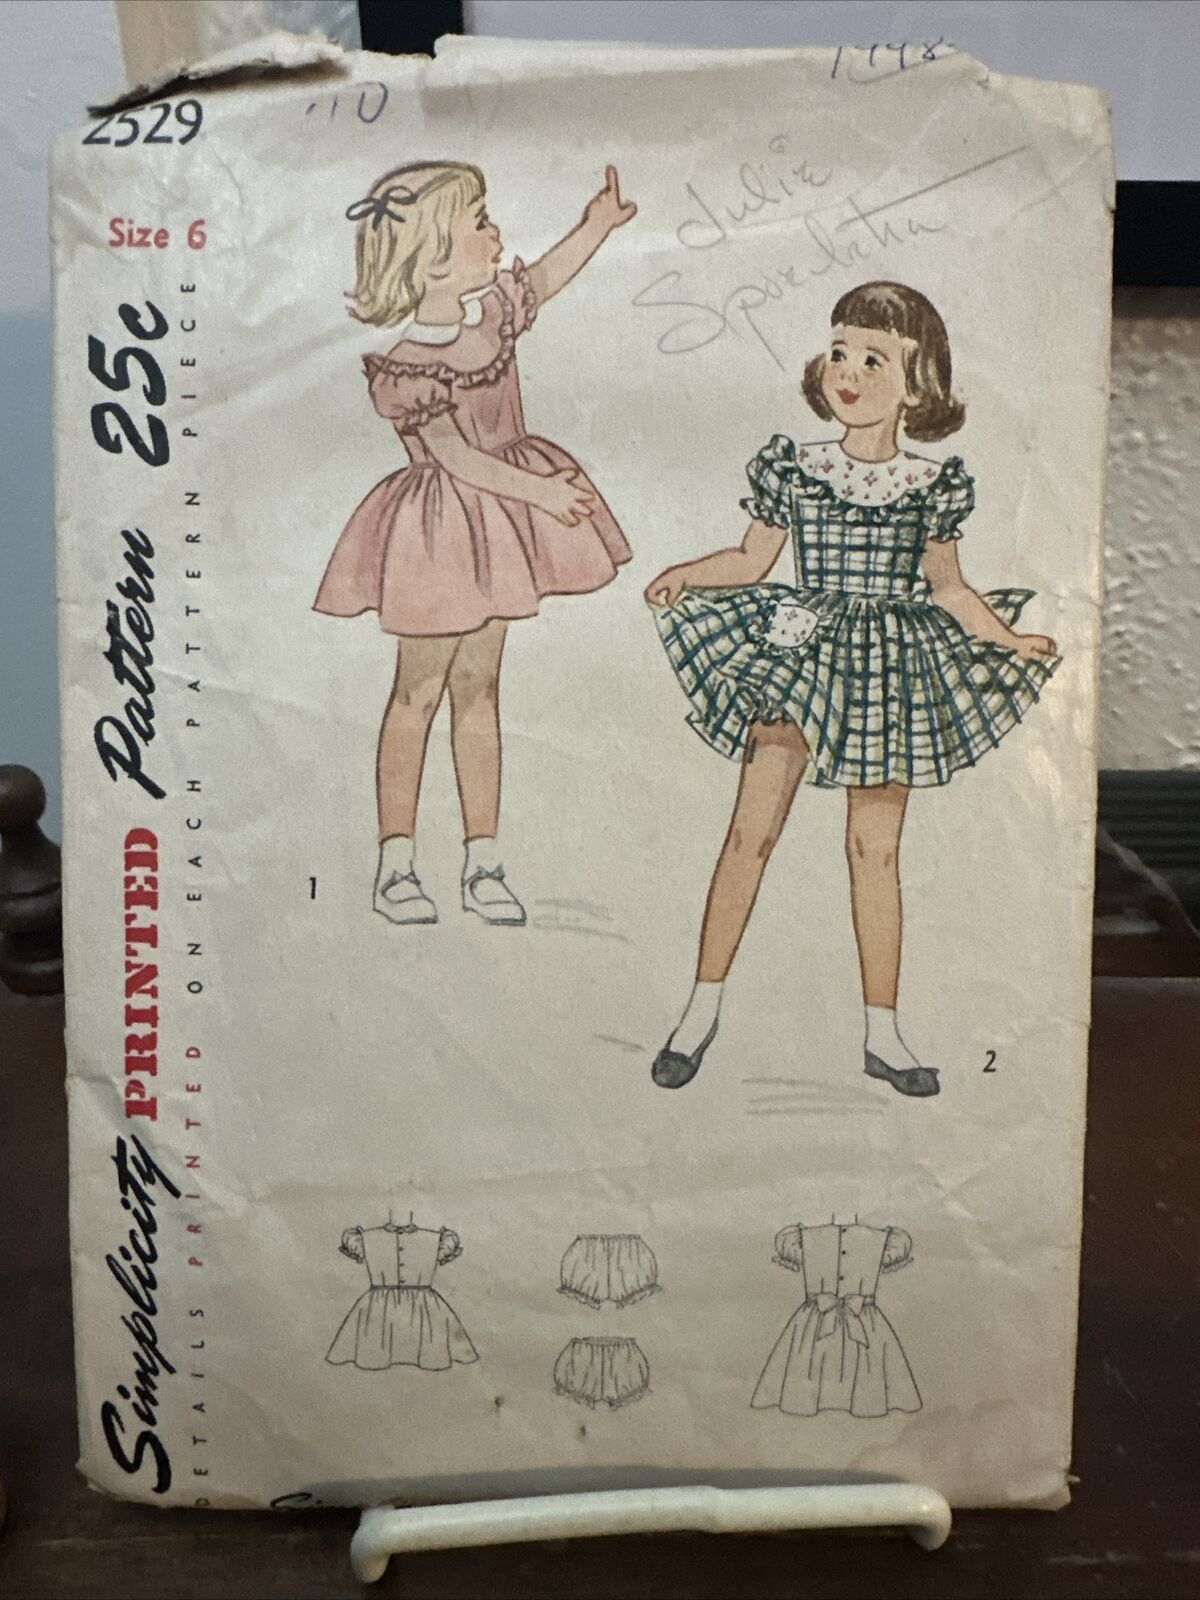 Vintage 1950s Simplicity Sewing Pattern Girls PARTY DRESS 2529 Girls Size 6